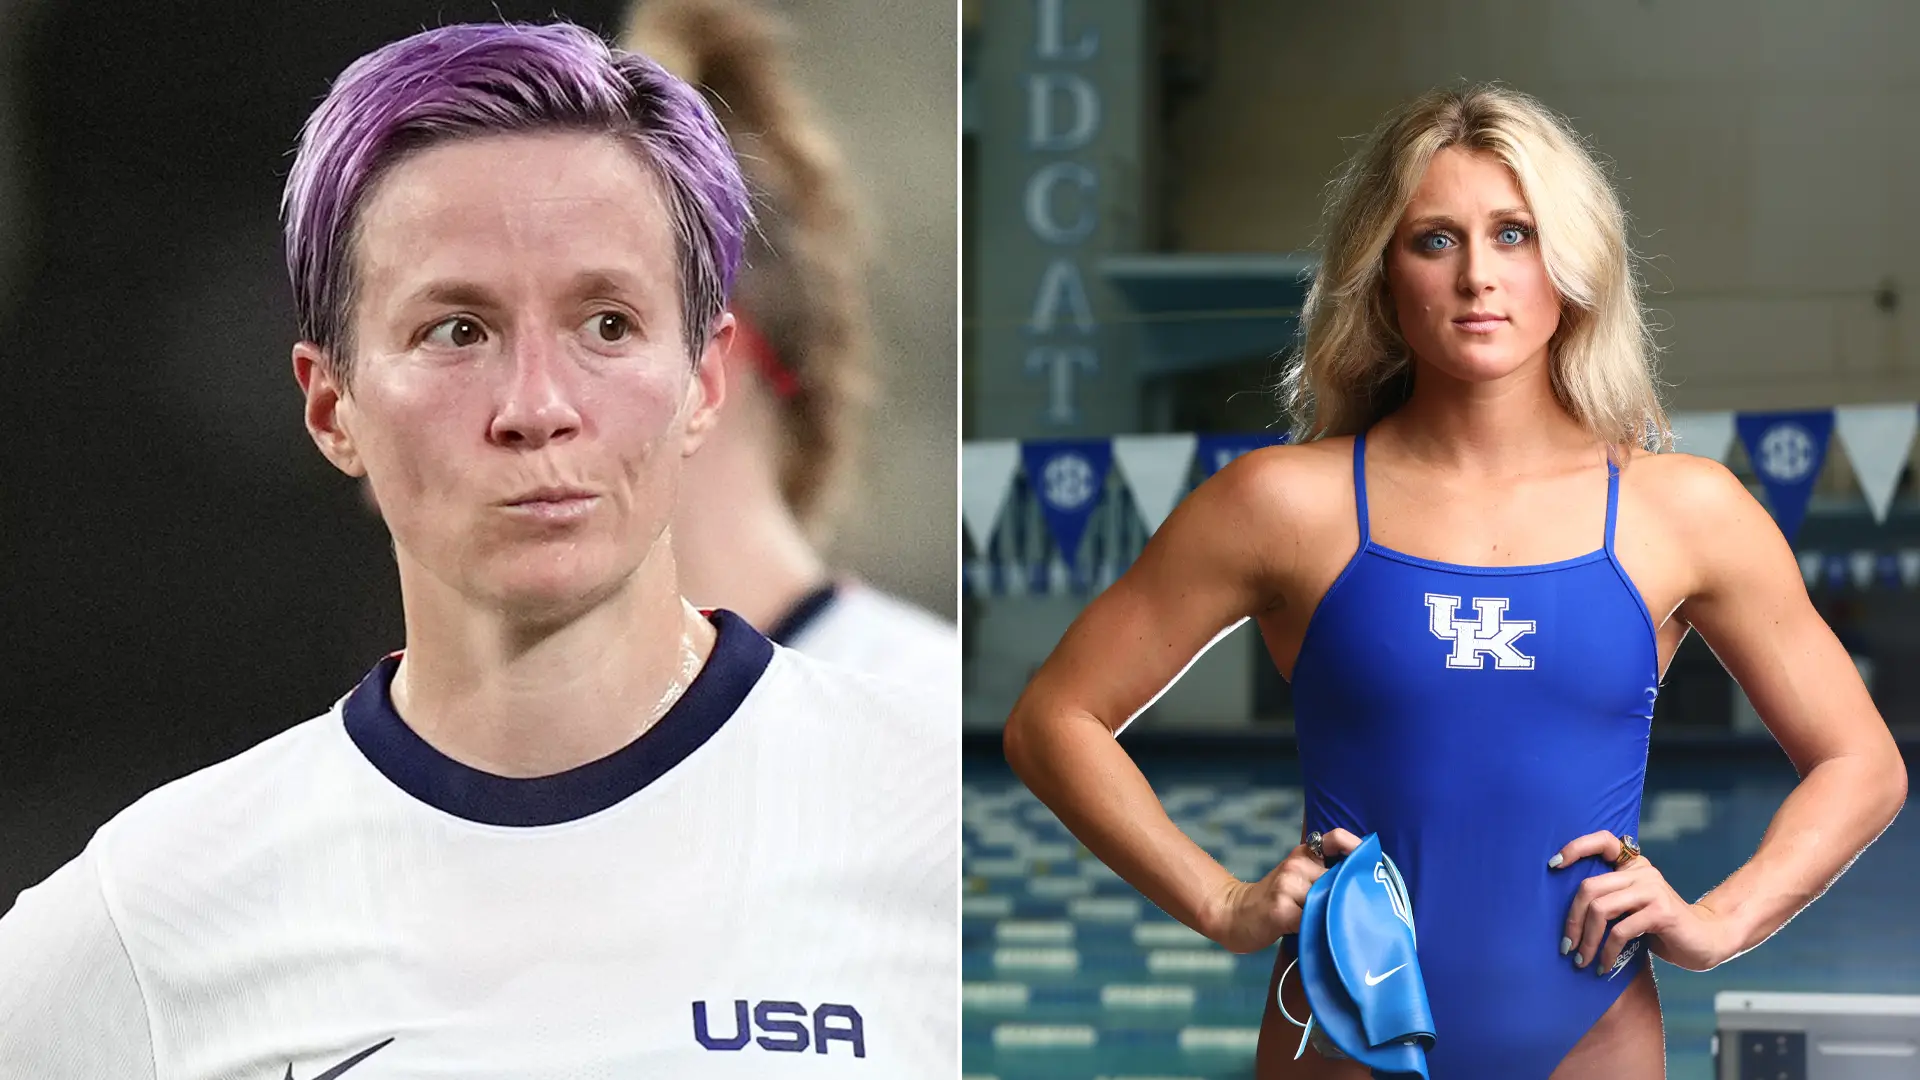 TRUE Riley Gaines Snatches "Woman of the Year" Title from Megan Rapinoe